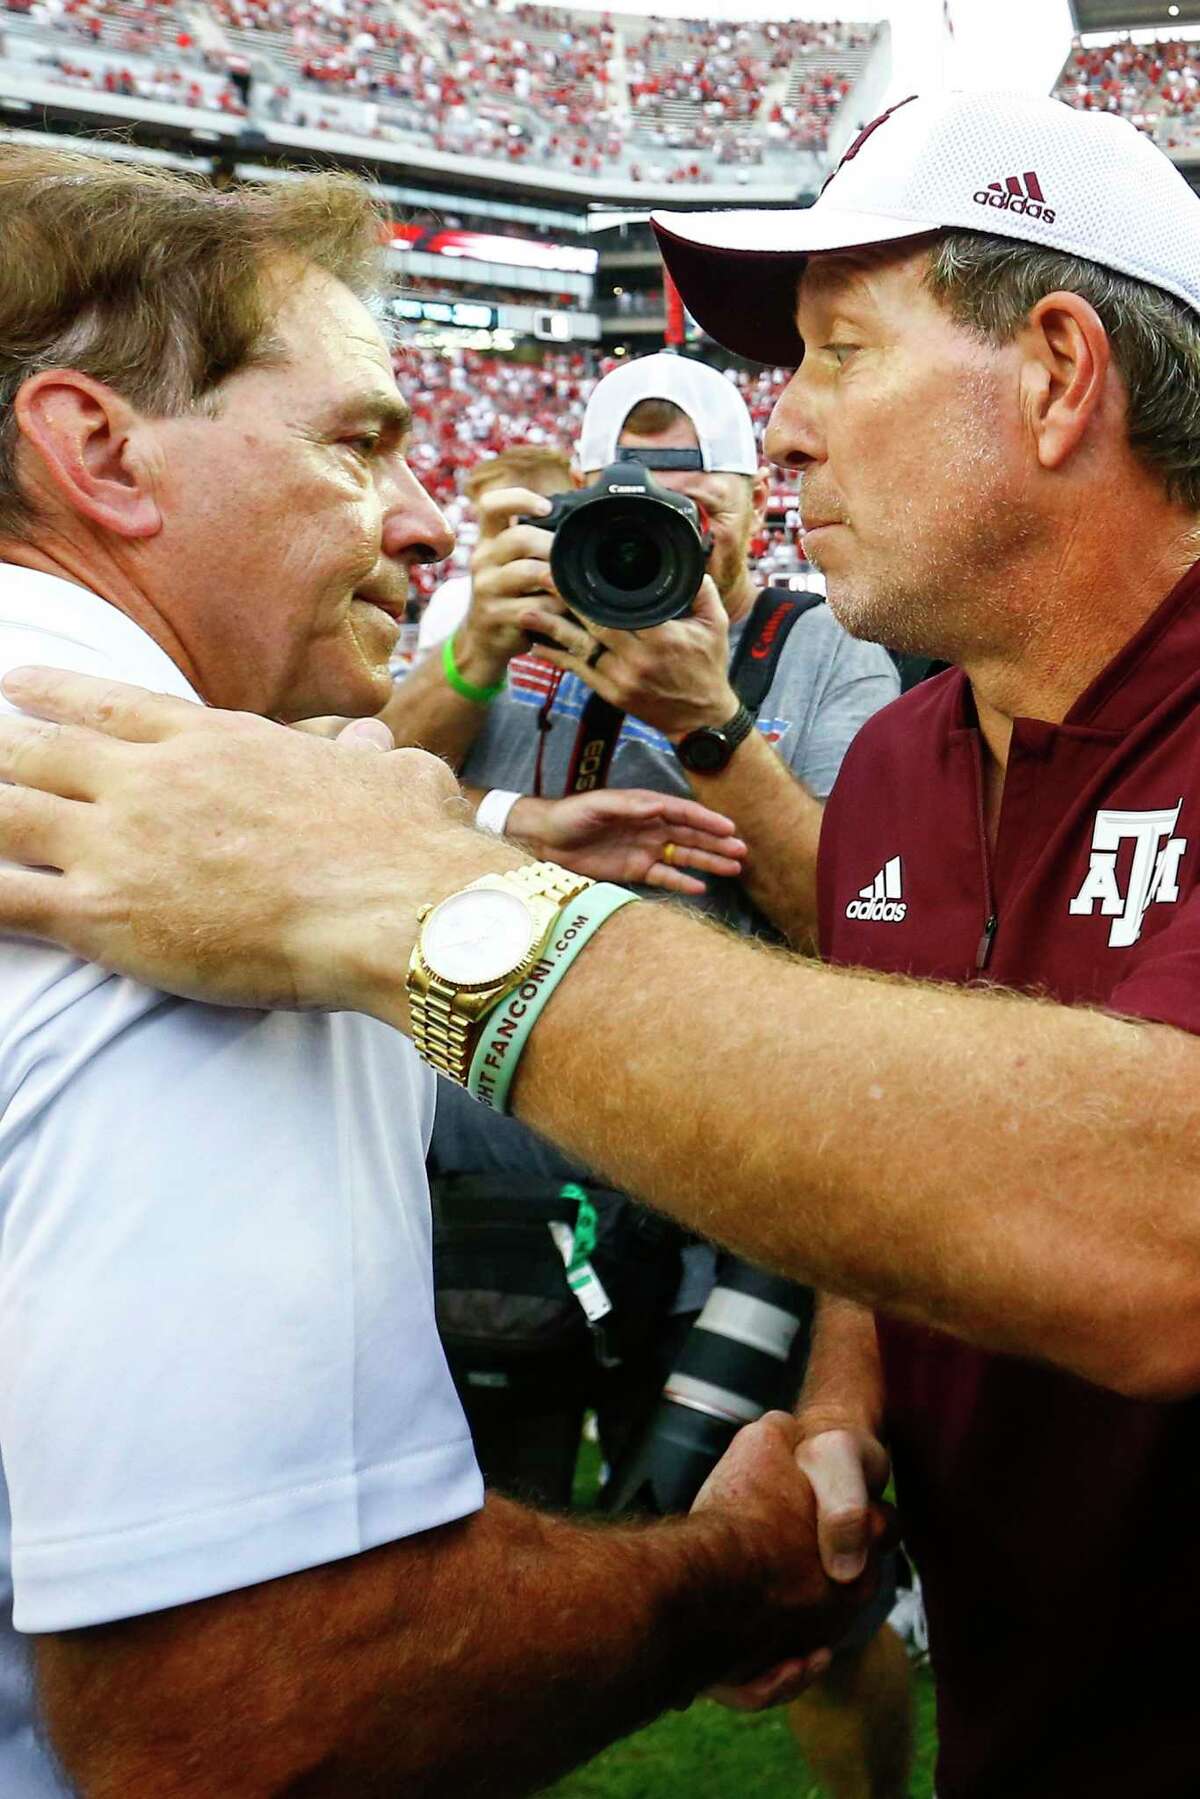 Alabama head coach Nick Saban shakes hands with Texas A&M head coach Jimbo Fisher after a game on Saturday, Sept. 22, 2018, in Tuscaloosa, Ala. Fisher called Nick Saban a “narcissist” after he made “despicable” comments about the Aggies using name, image and likeness deals to land their top-ranked recruiting classes. Saban called out A&M for “buying” players.